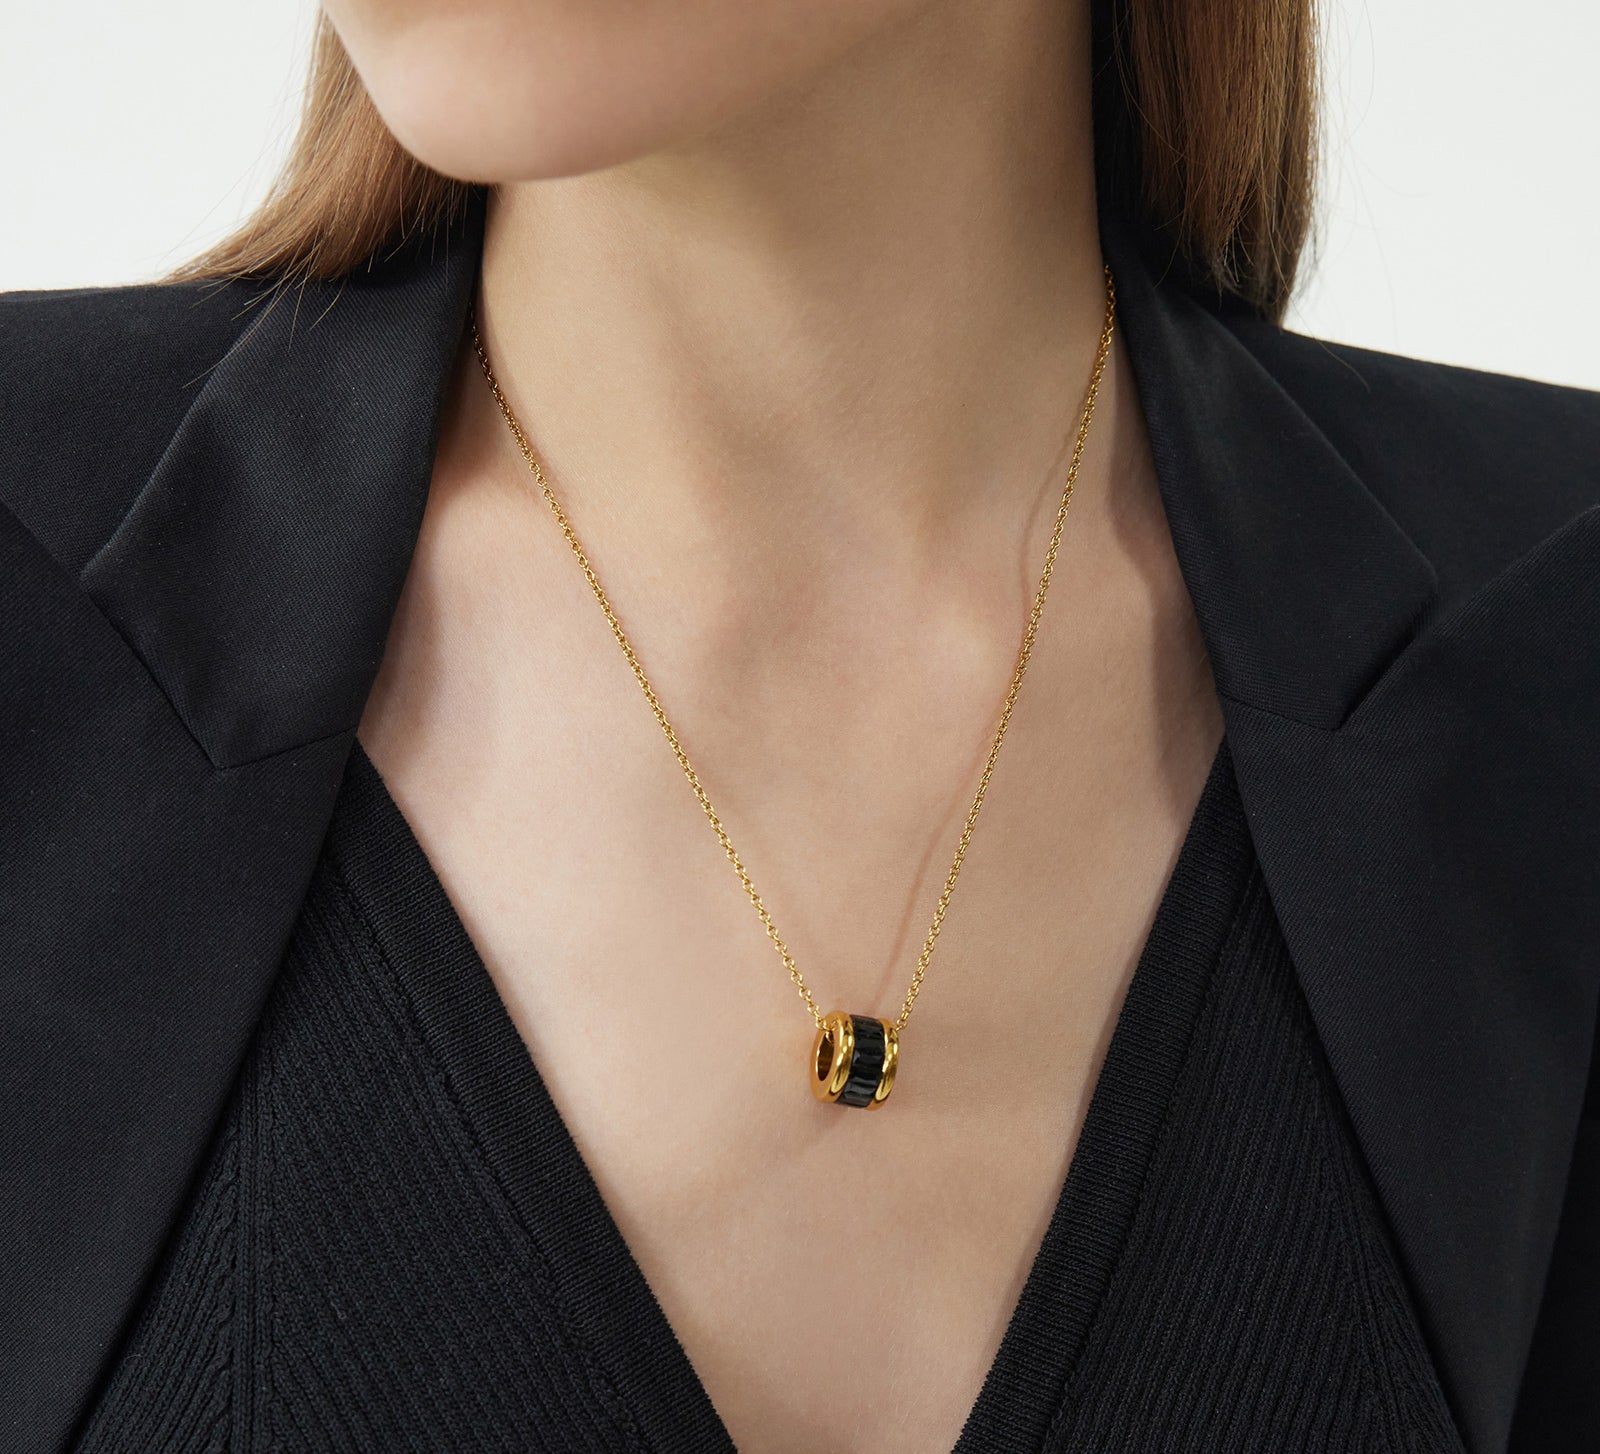 Ring Pendant Chain Necklace in Black, a minimalist and noir-inspired piece, this necklace features a black ring pendant suspended from a dainty chain, creating a subtle and modern accessory for everyday wear